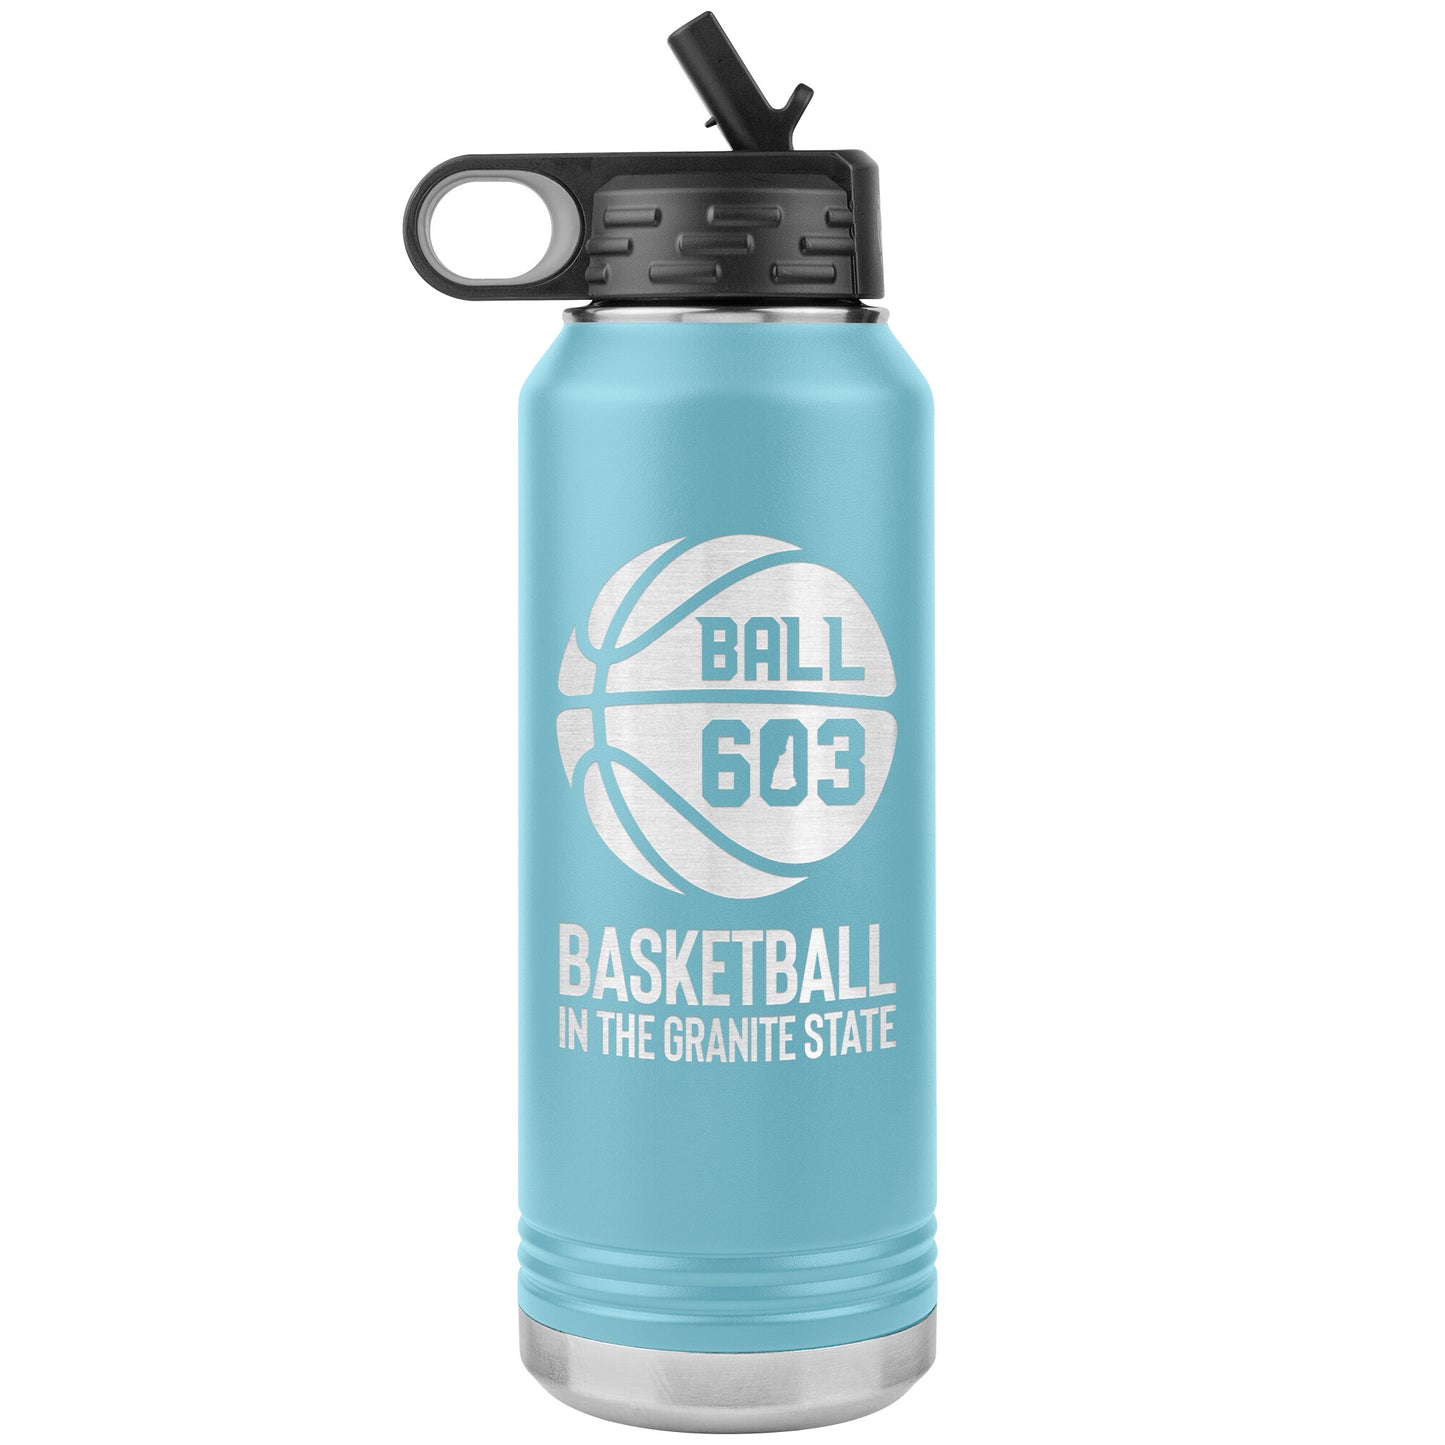 Ball 603 Insulated Water Bottle (32oz)